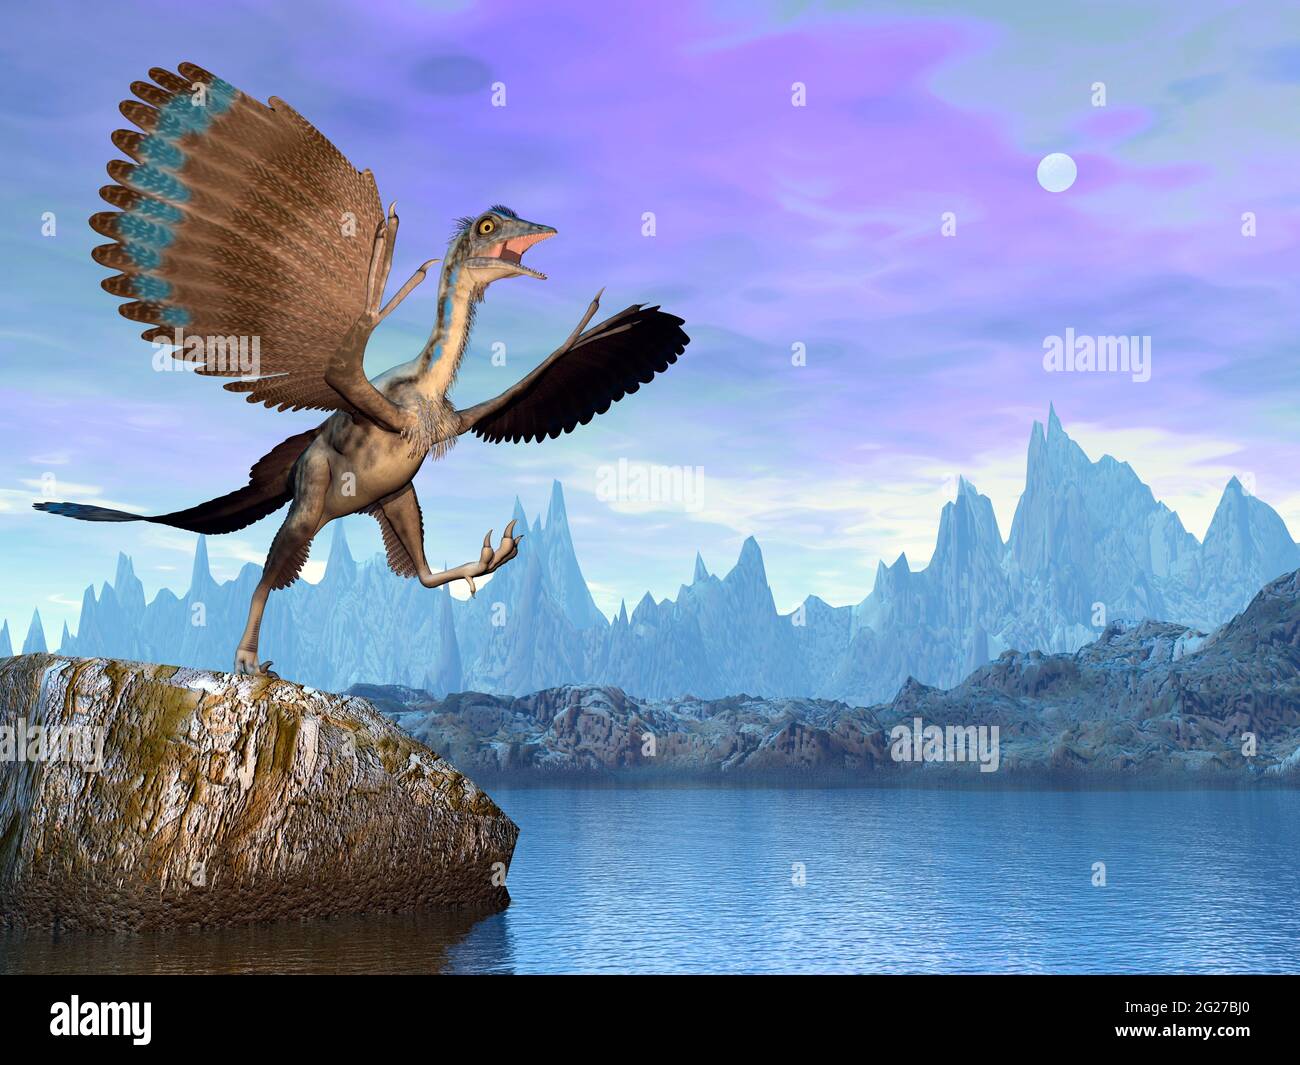 Archaeopteryx prehistoric bird next to the water at night. Stock Photo